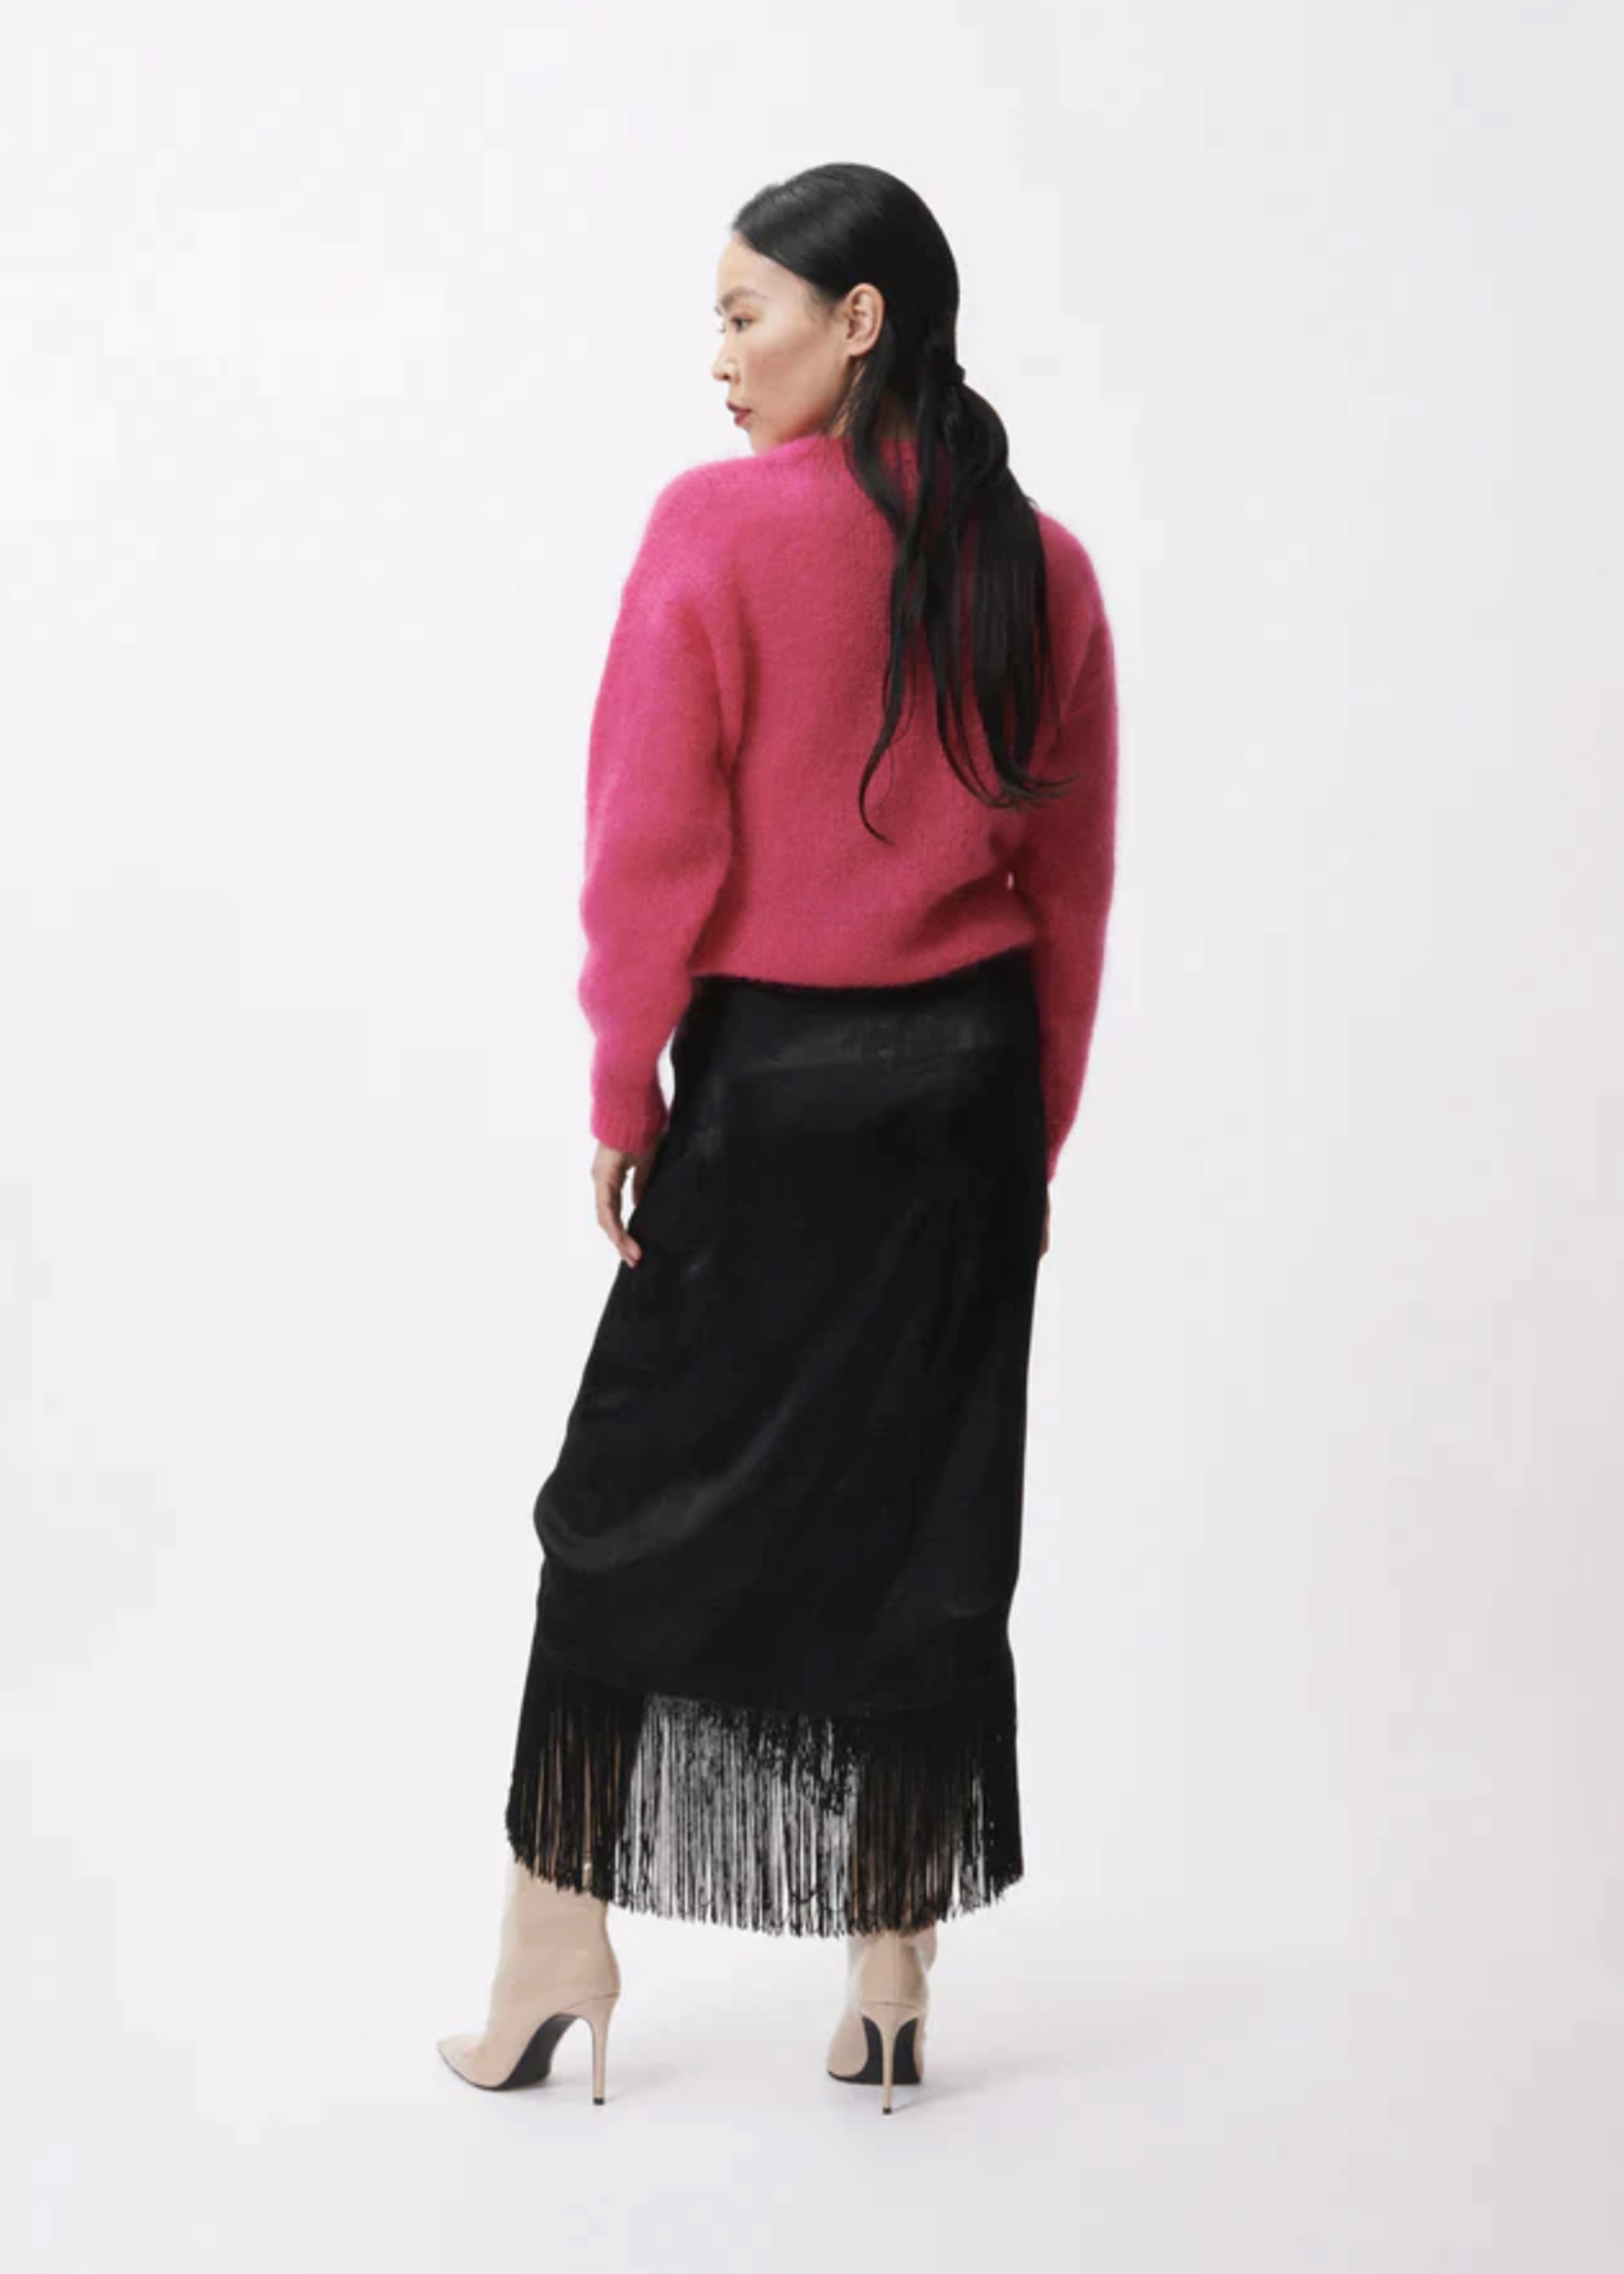 Elitaire Boutique Cecylia Woven Skirt in Black